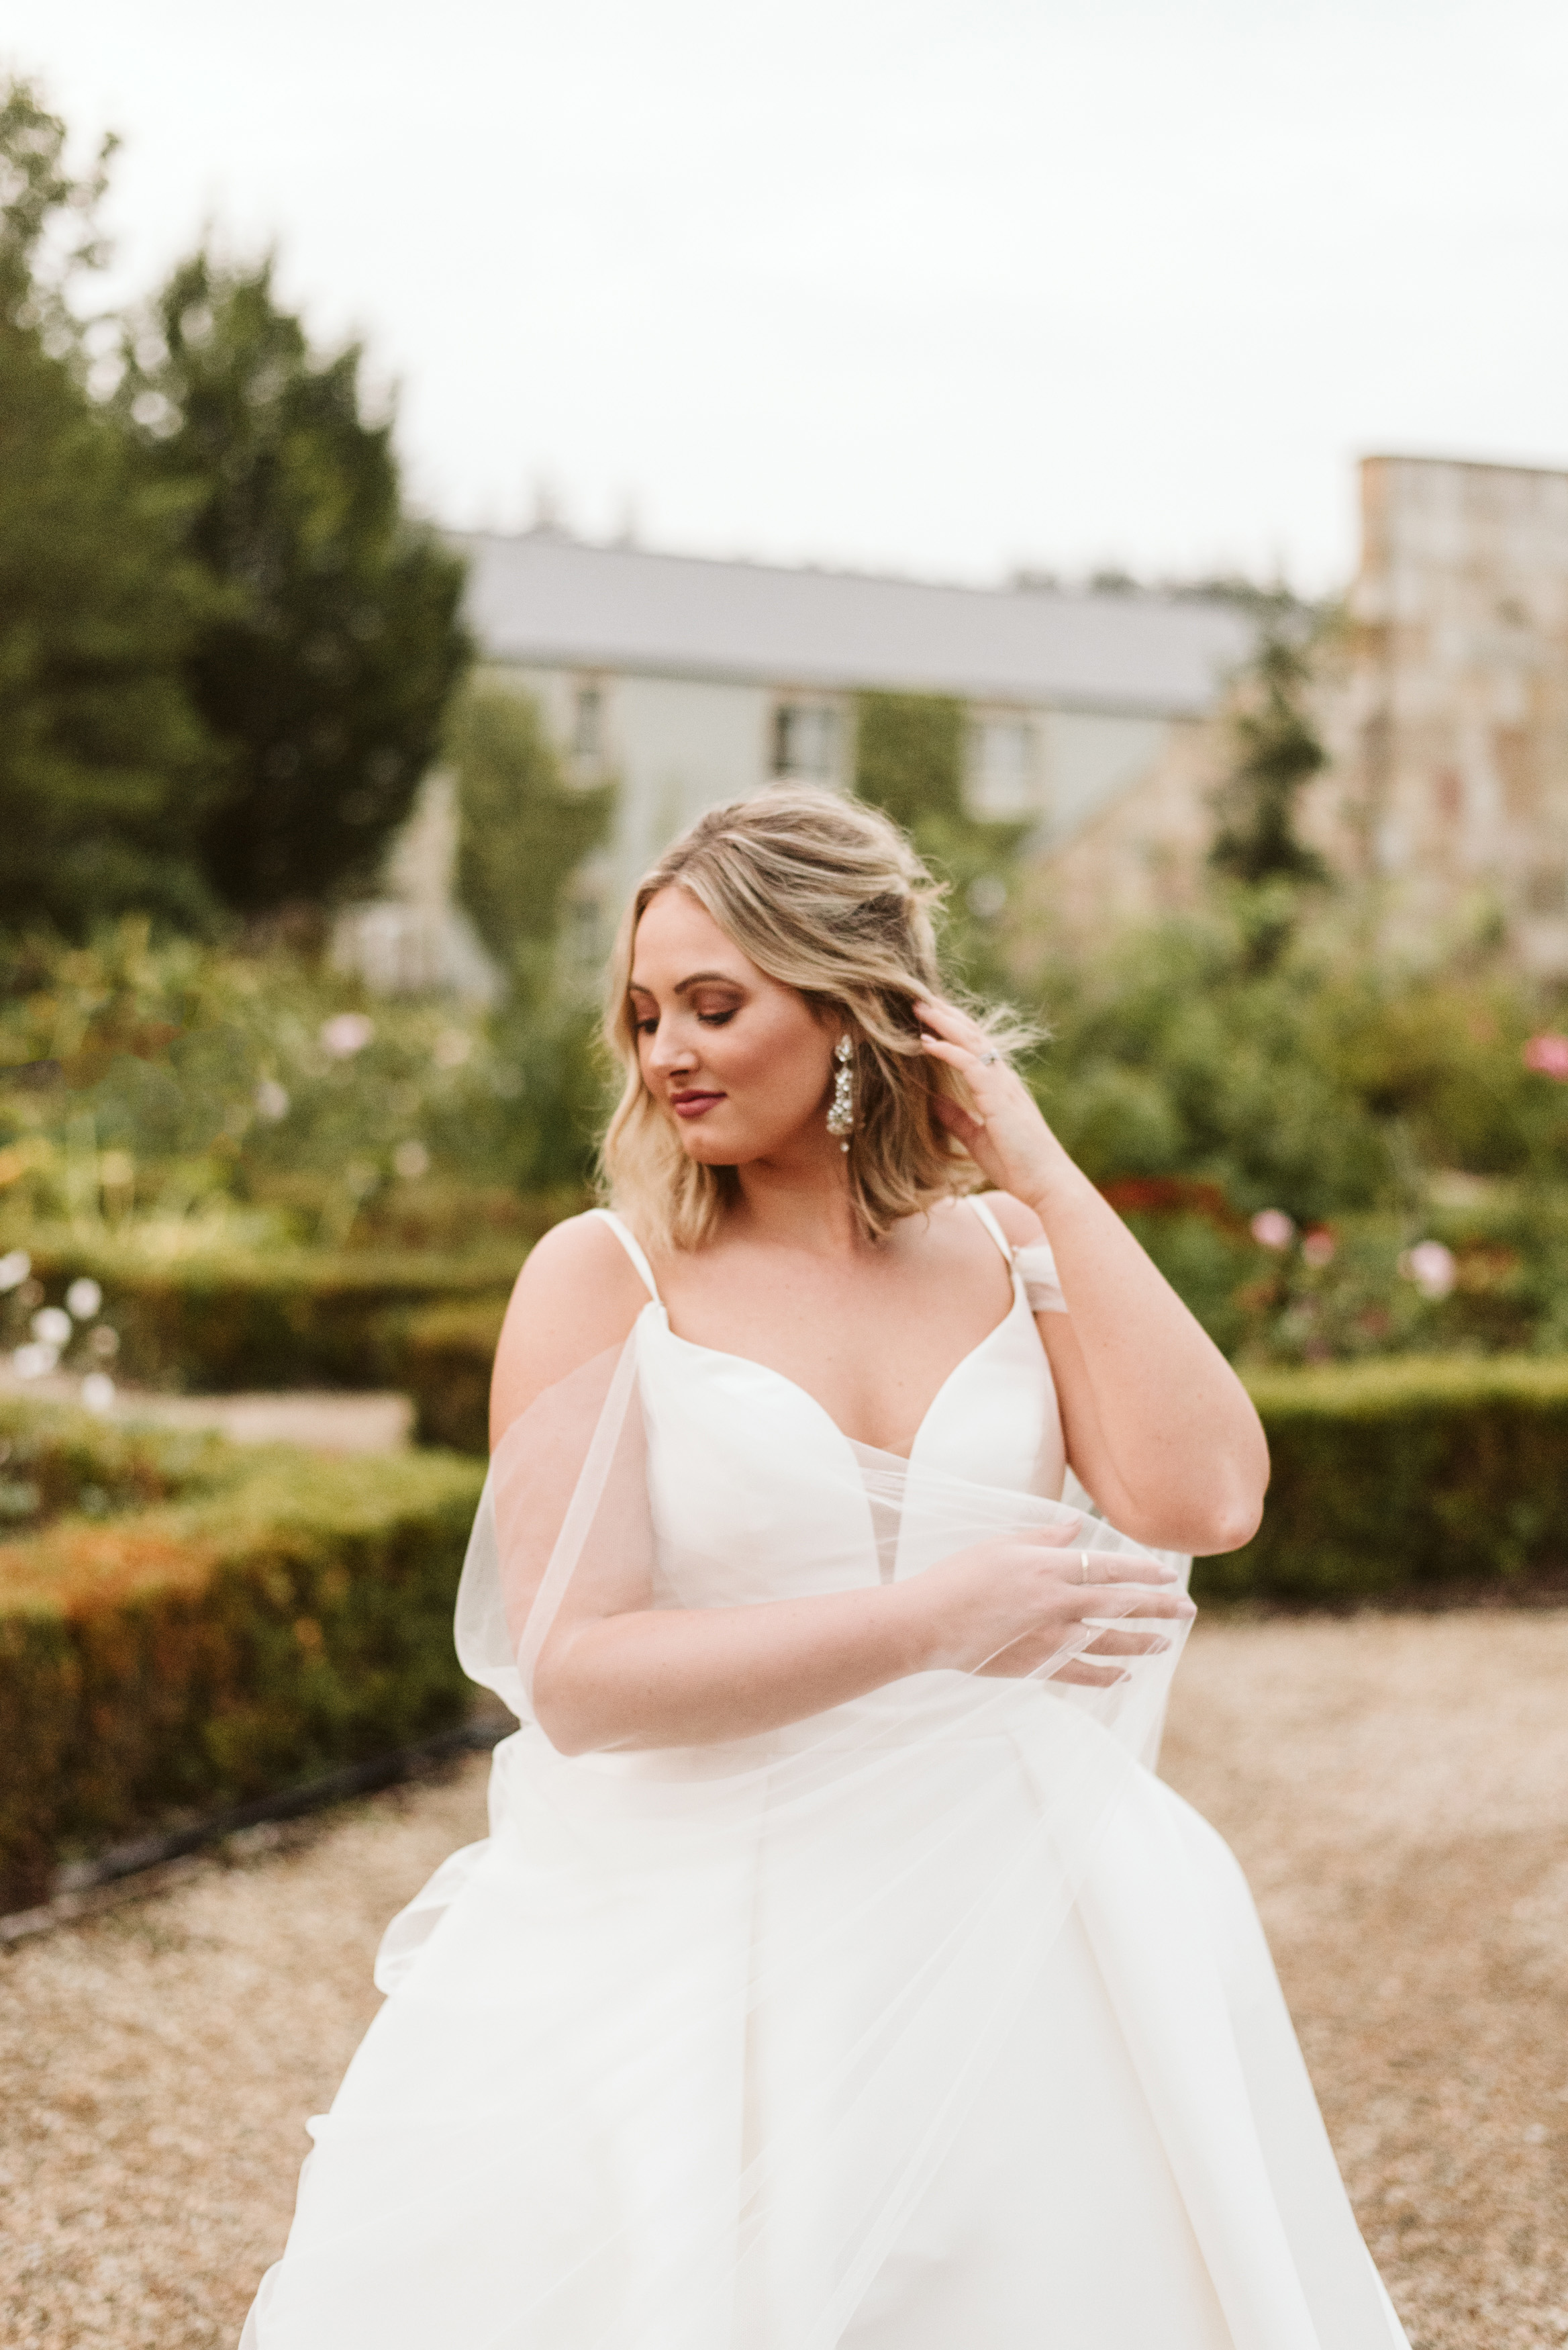 Brideshowing off her sparkly earrings in a mikado ballgown wedding dress and tulle cape at Lough Eske Castle's grounds in Ireland